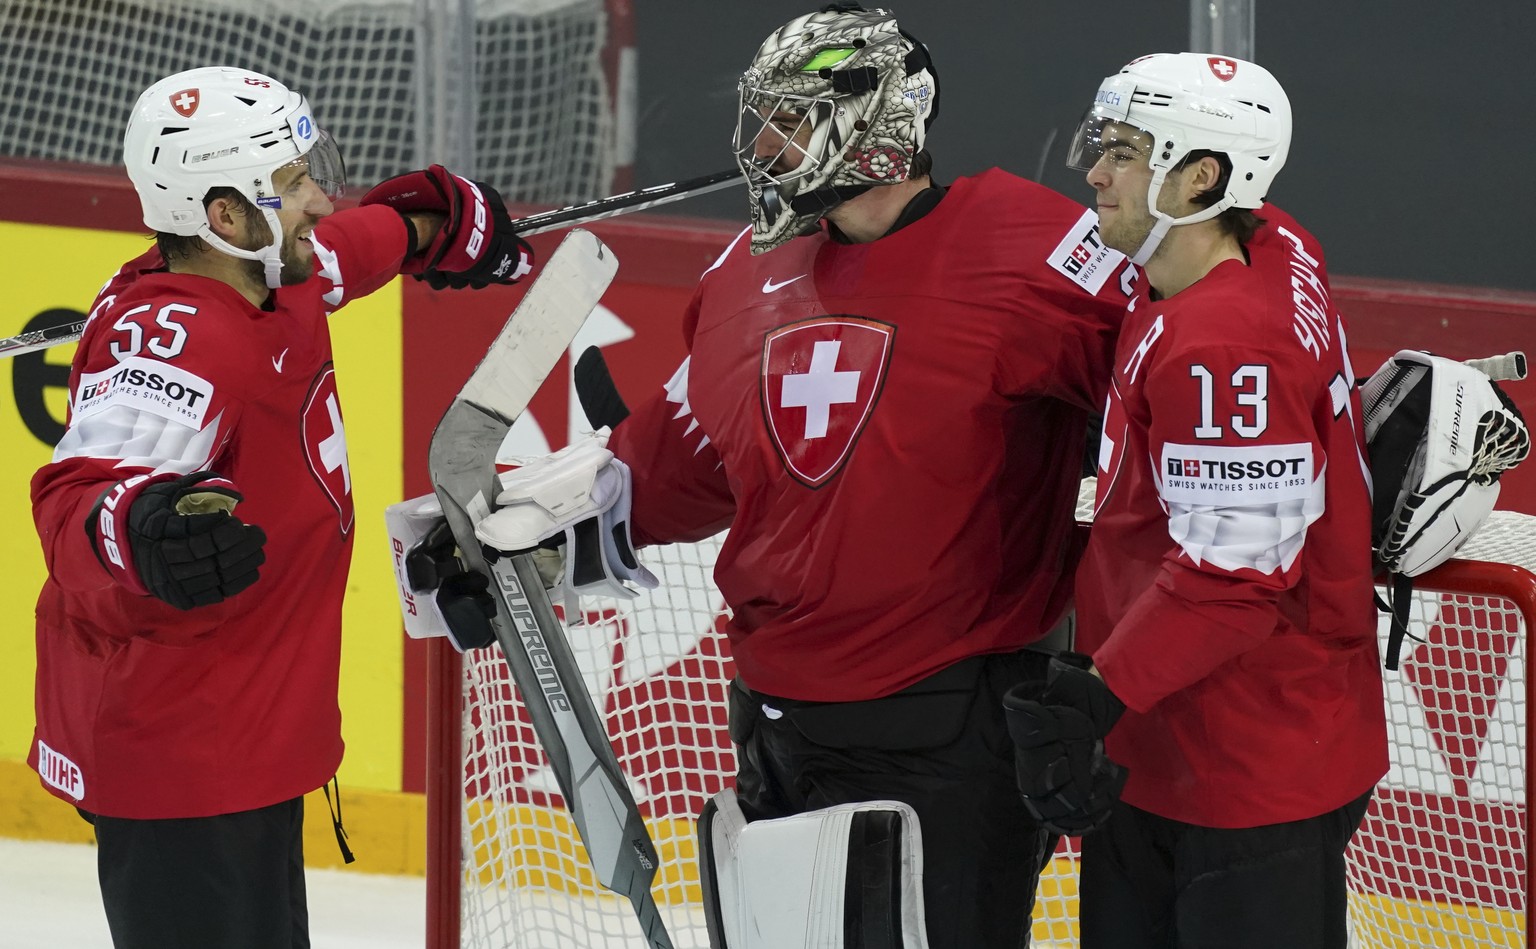 From left, Romain Loeffel, Reto Berra and Nico Hischier of Switzerland celebrates after the Ice Hockey World Championship group A match between Switzerland and Slovakia at the Olympic Sports Center in ...